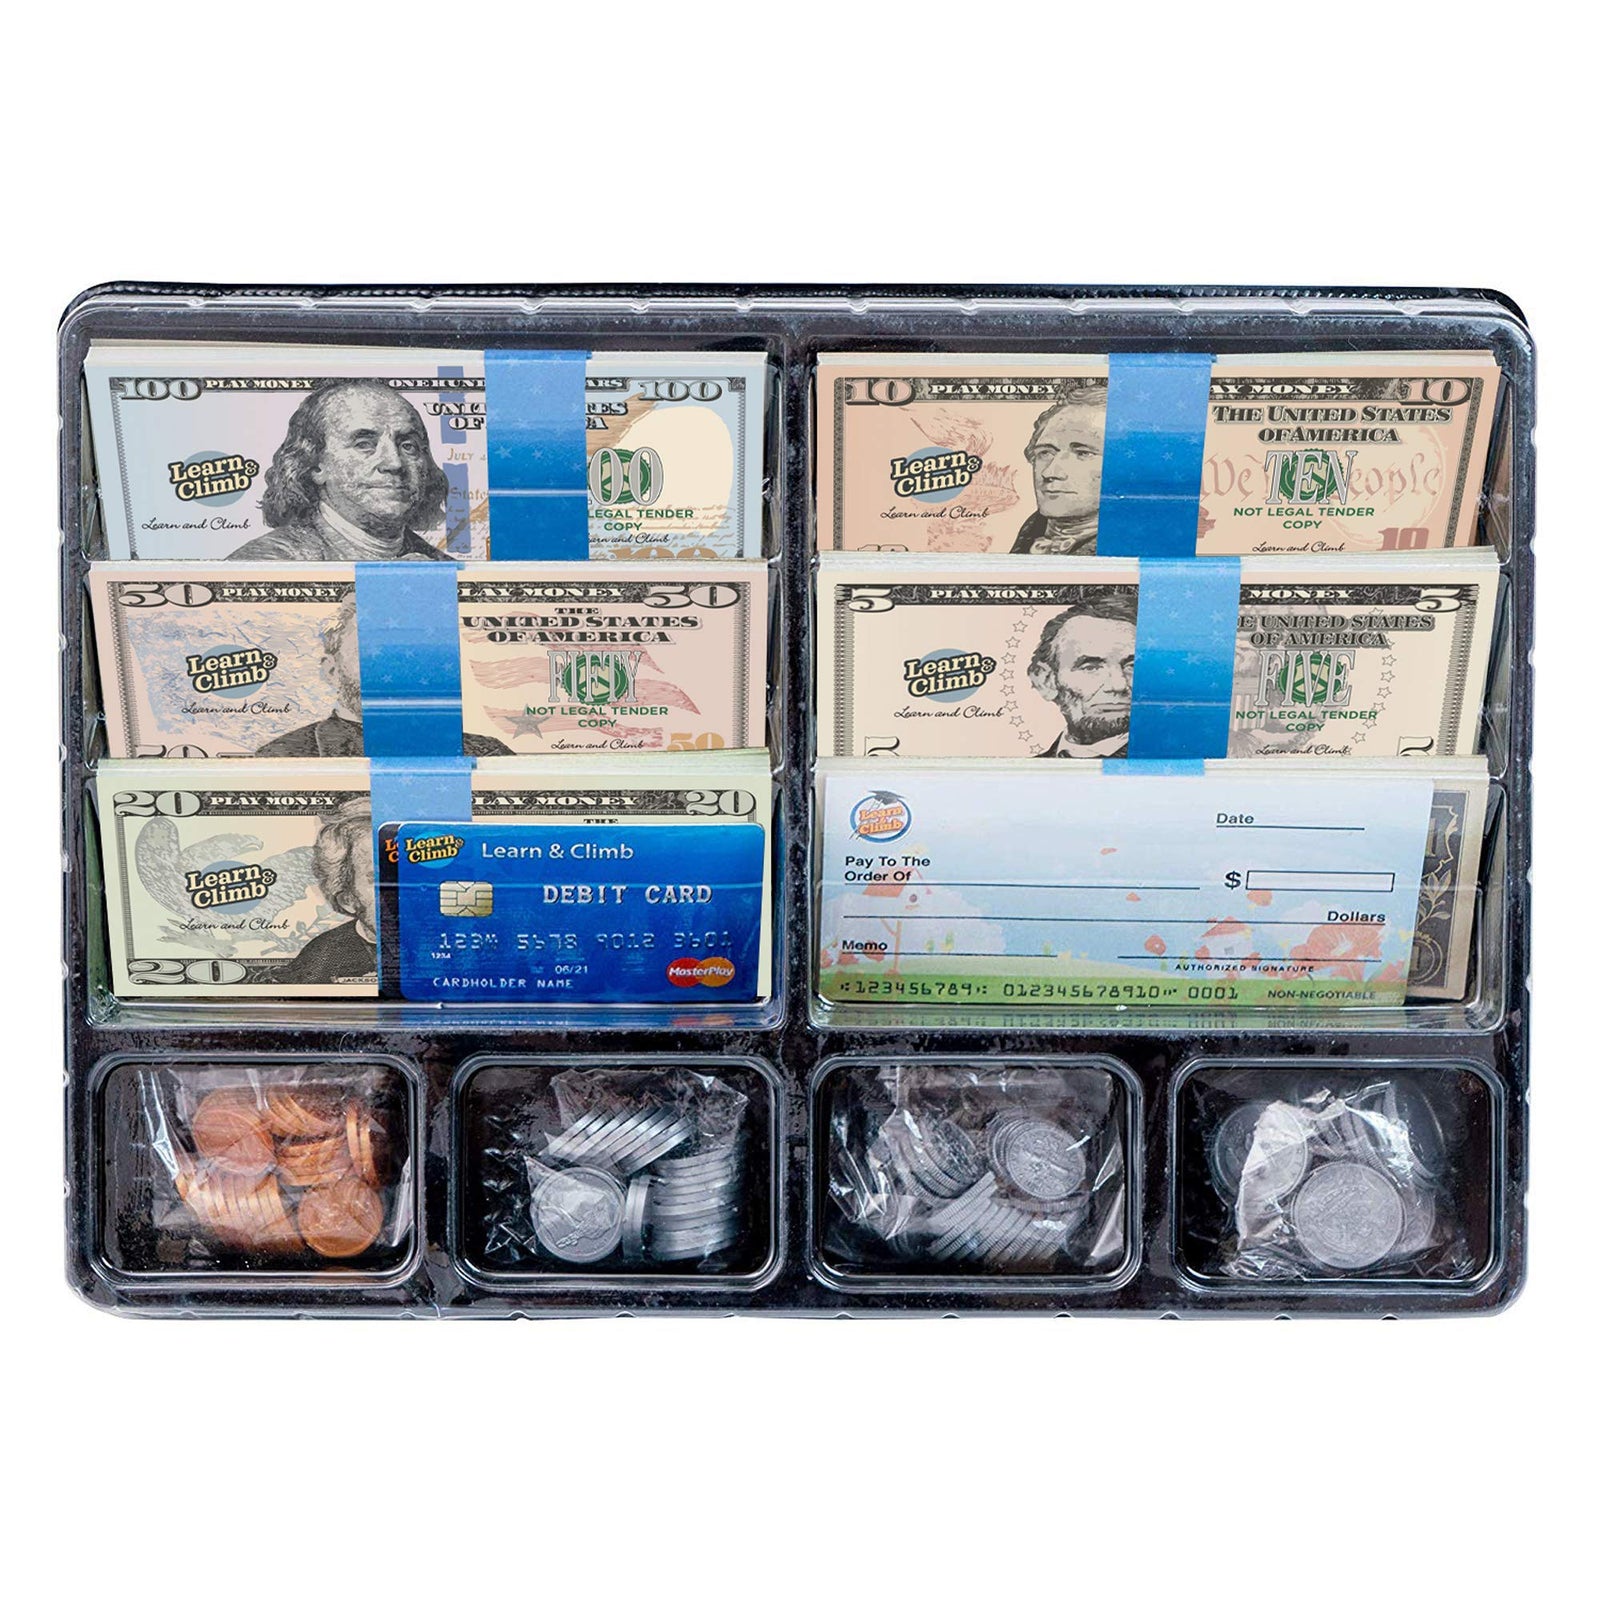 Play Money for kids – Looks Real Play Money Set for Pretend Play & Learning. Contains: Bills, Coins, Credit & Debit Cards and Checkbook